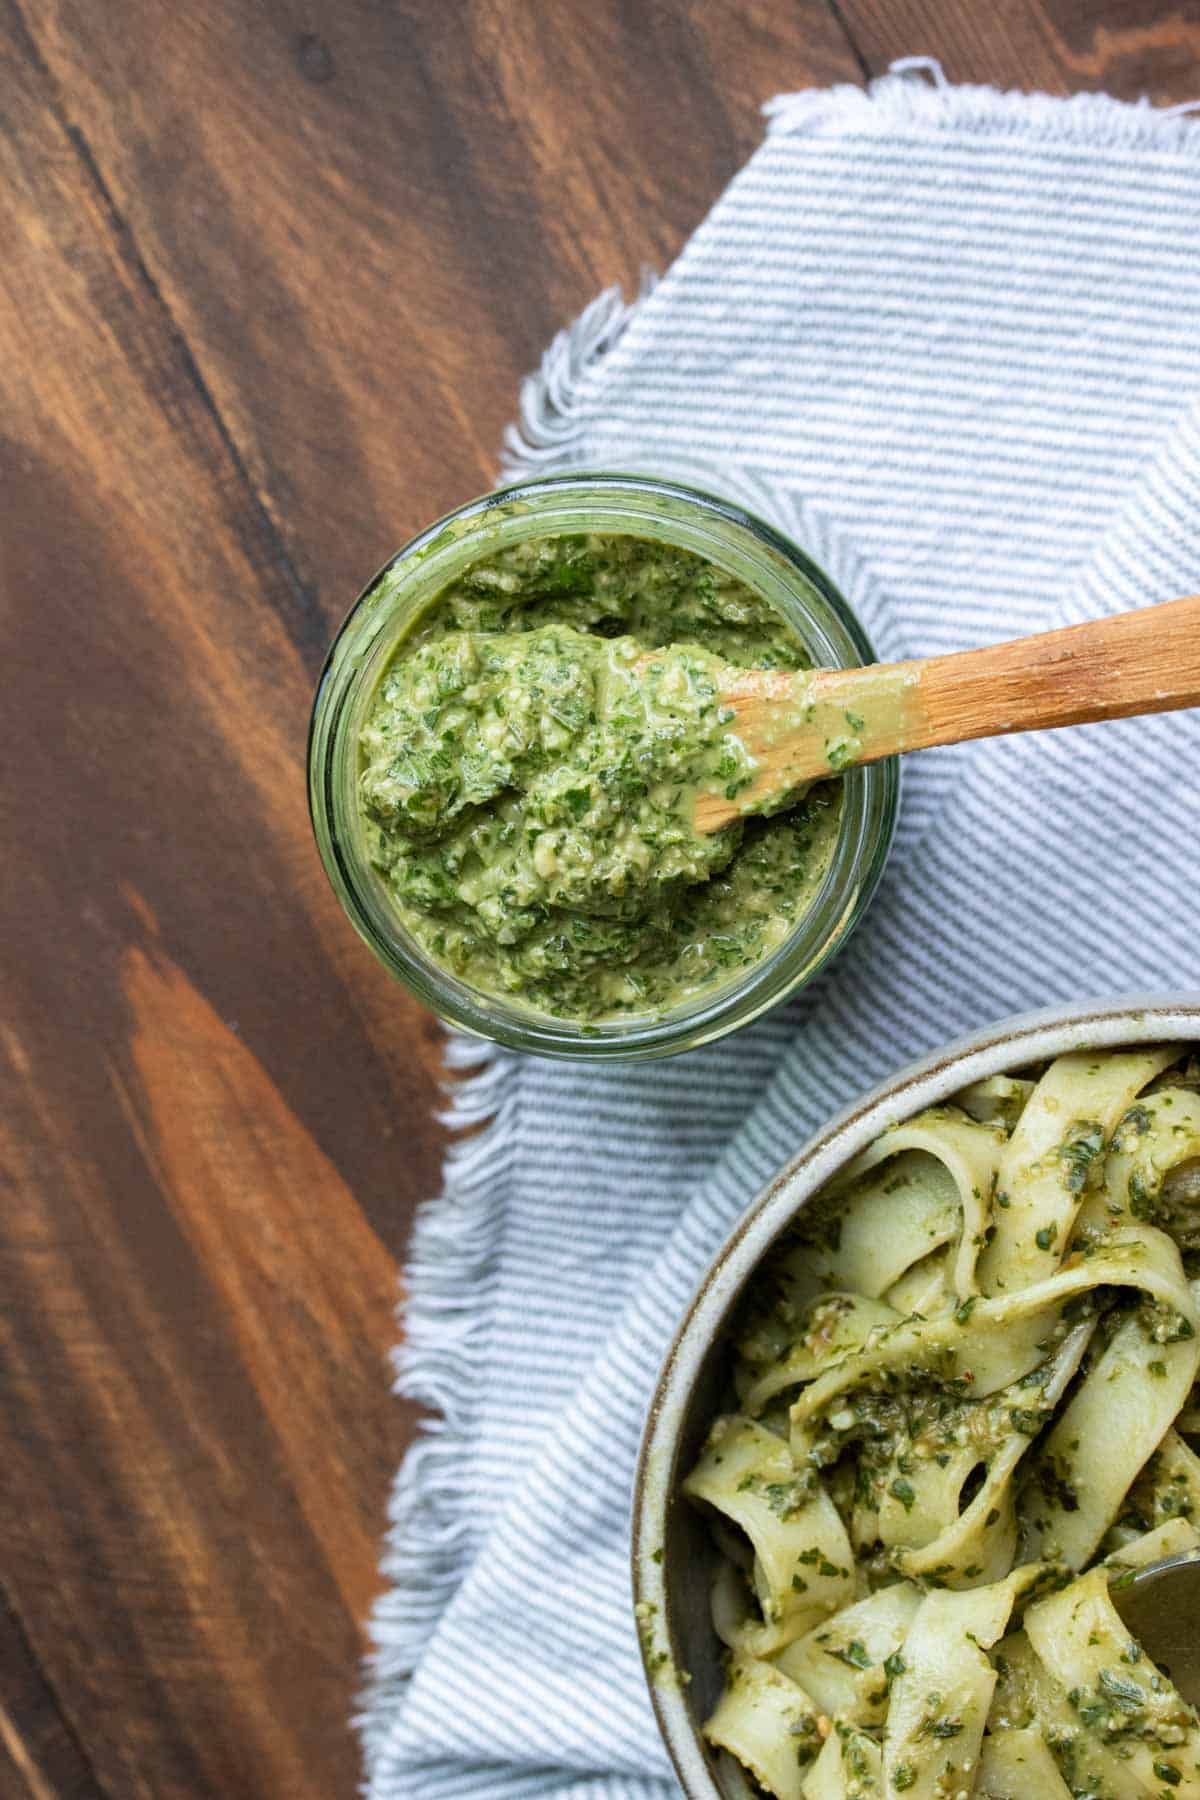 Wooden spoon getting a scoop of pesto from a glass jar